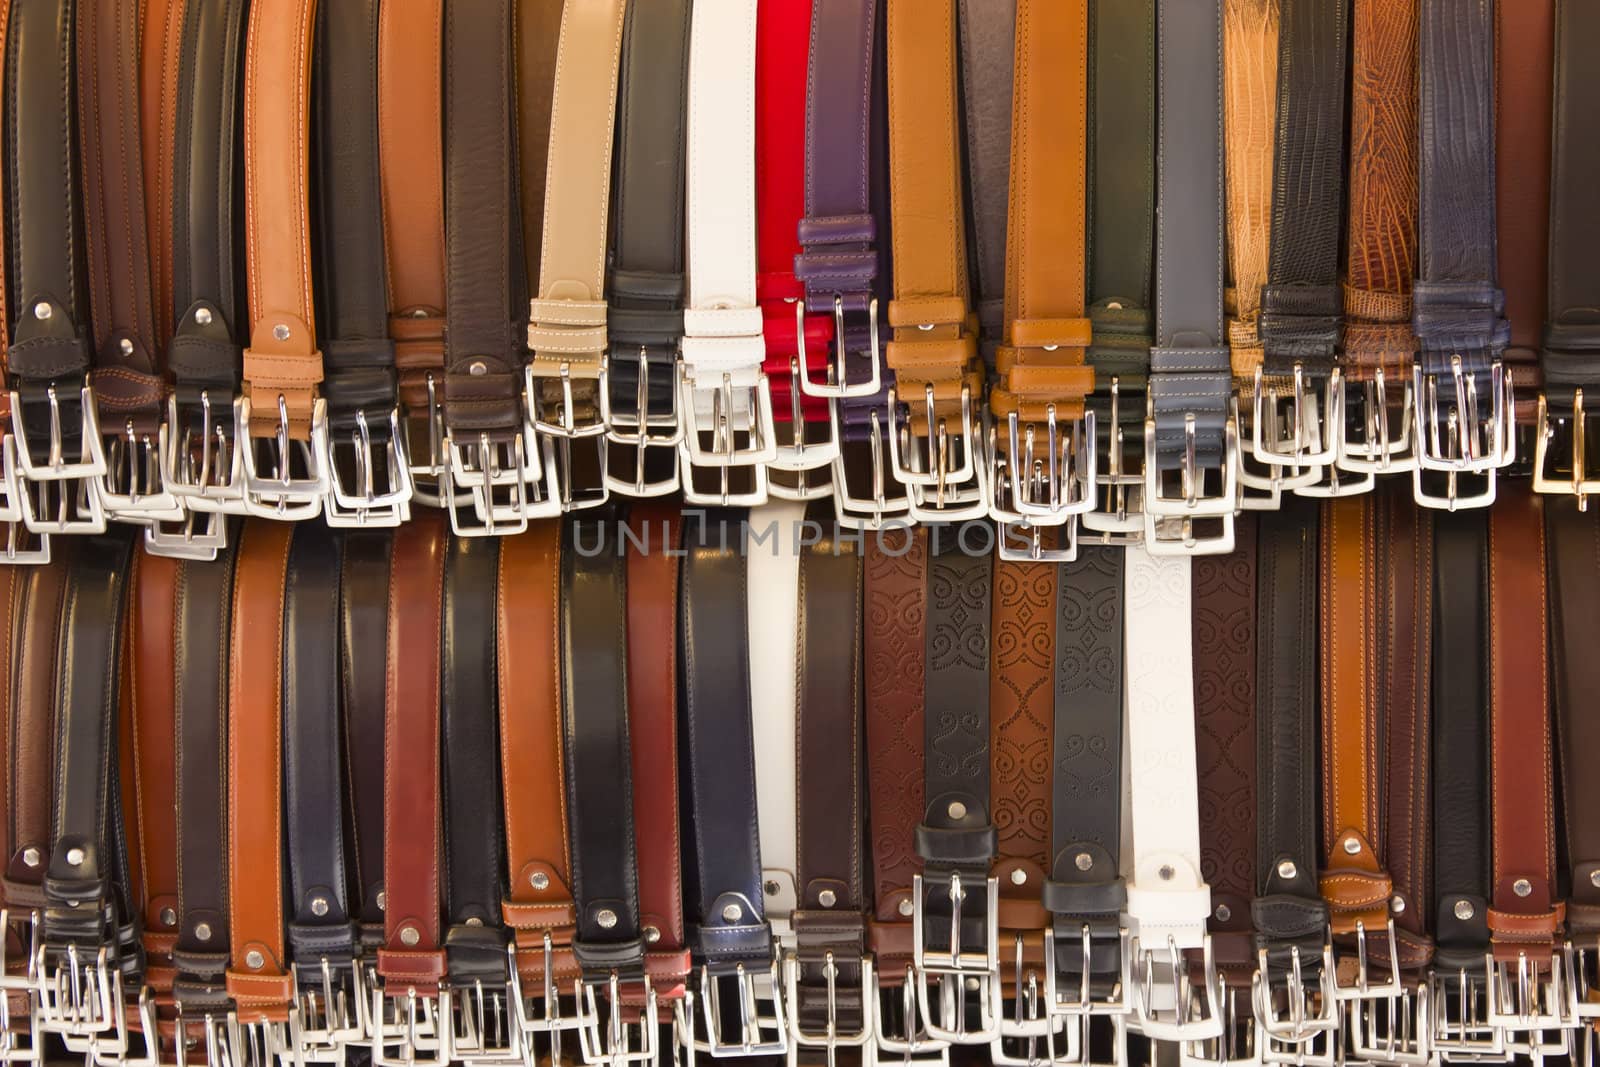 Leather belts by rgbpepper